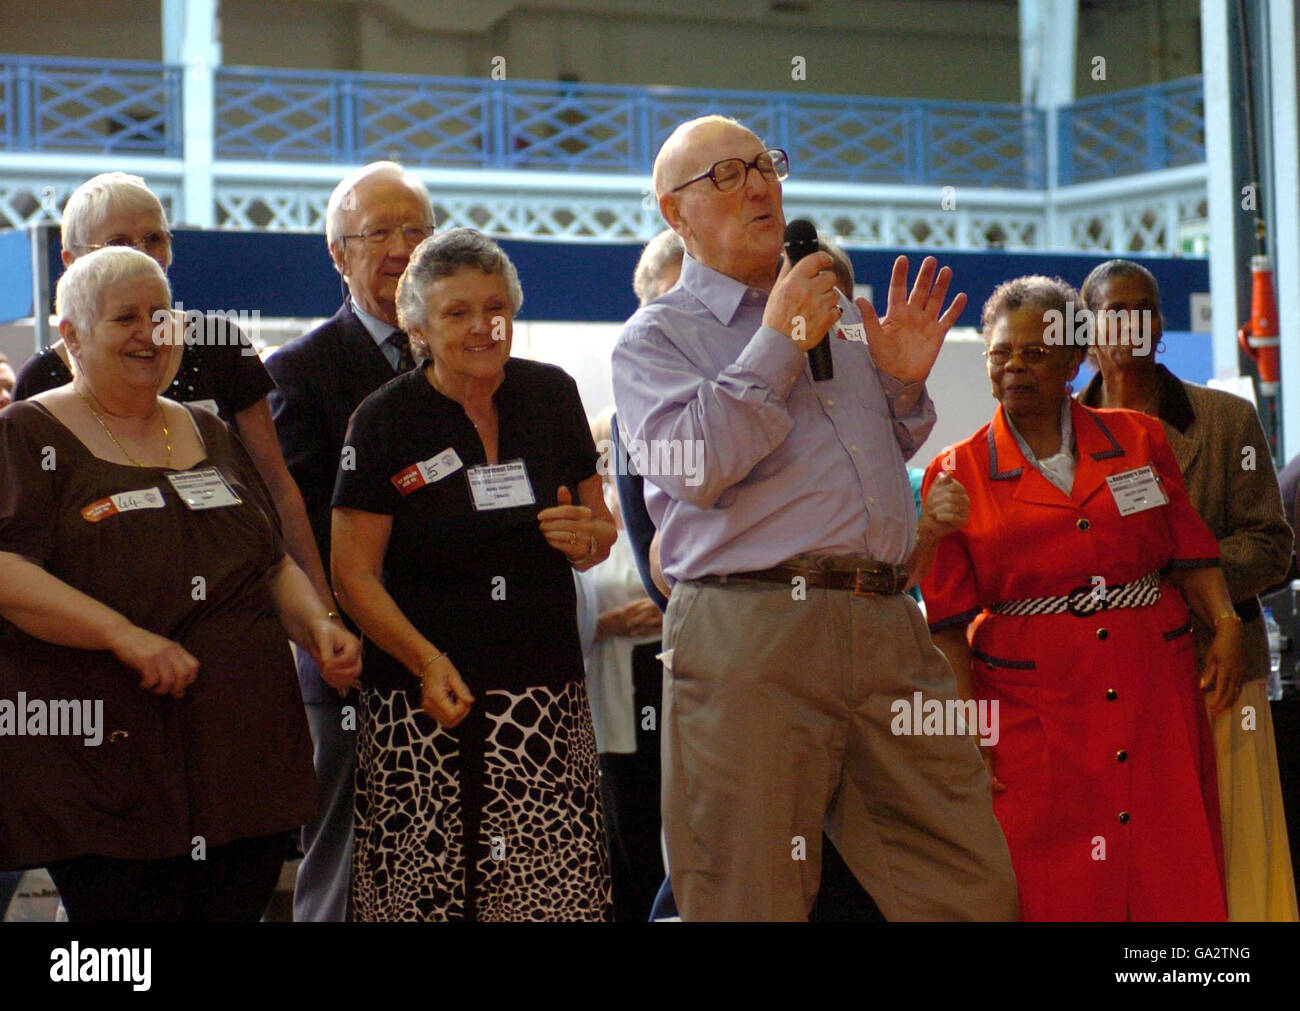 Alf Carretta, aged 90, lead singer of The leads the group in their version of The Who's 'My Generation', at the Retirement Show, Olympia, today Photo - Alamy